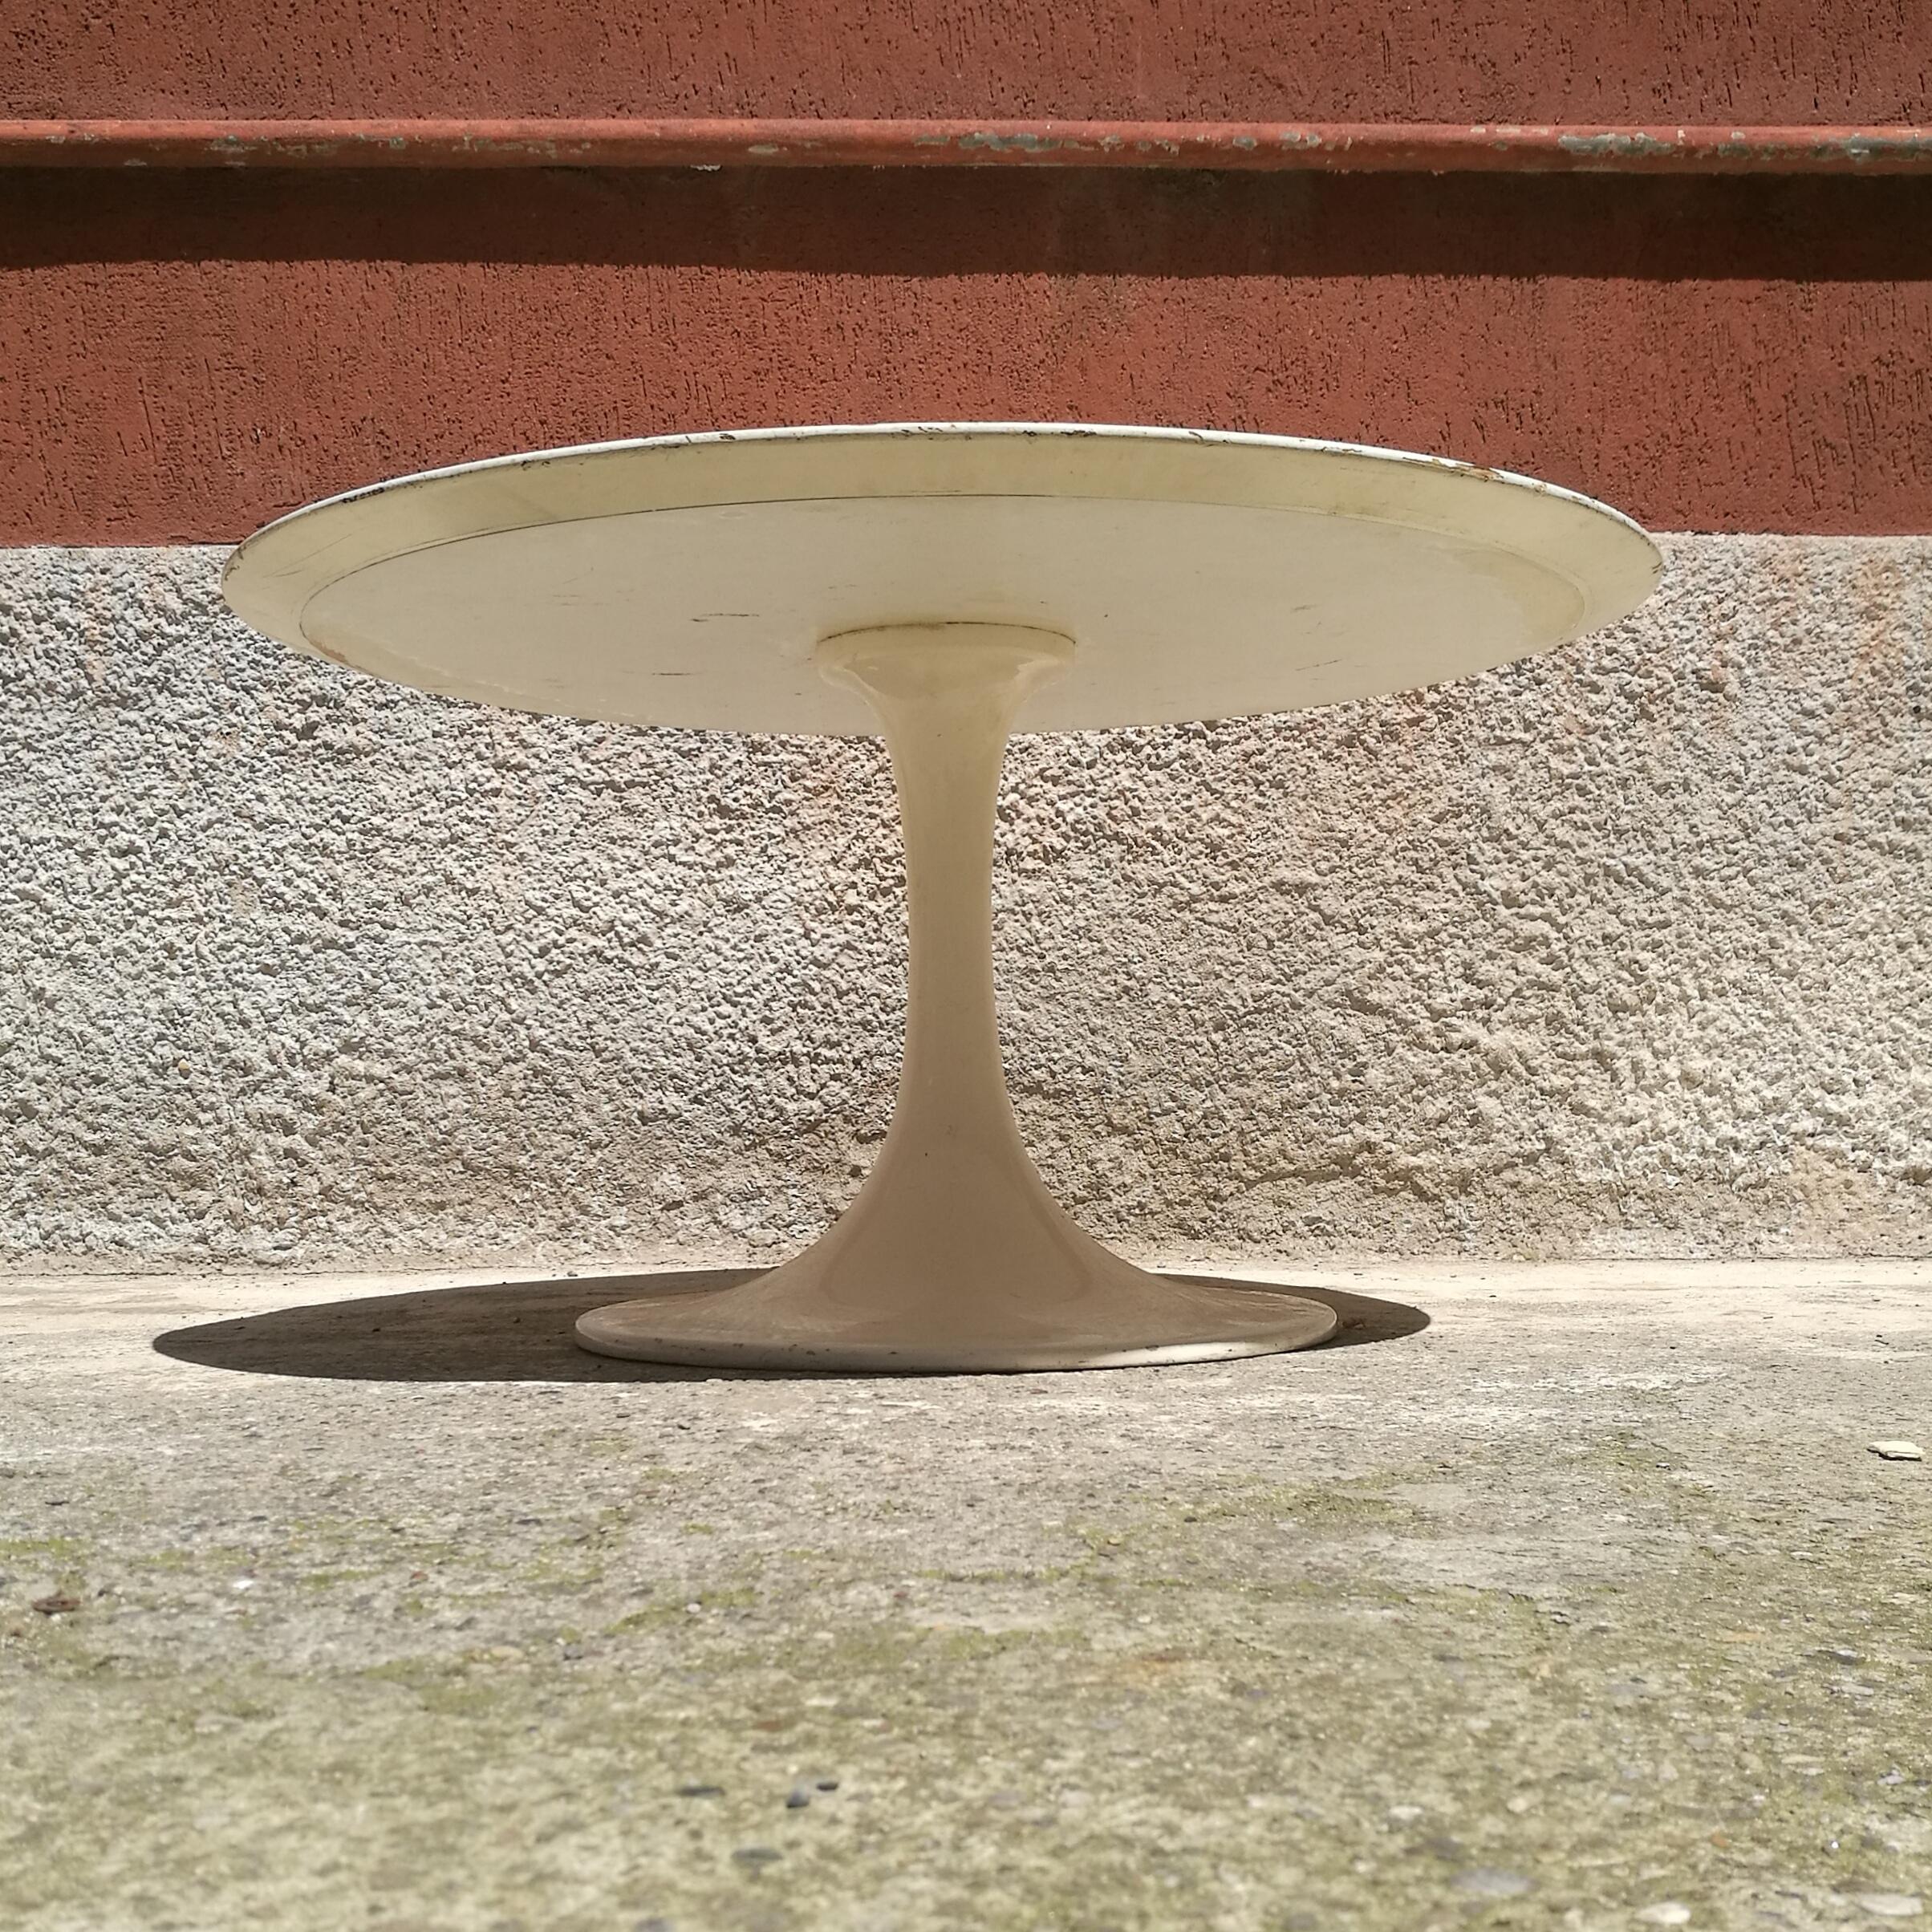 Italian round tulip coffee table, 1970s
Italian round tulip coffee table, in the style of Eero Saarinen for knoll.
The base is in white metal while the top is in metal and laminate.